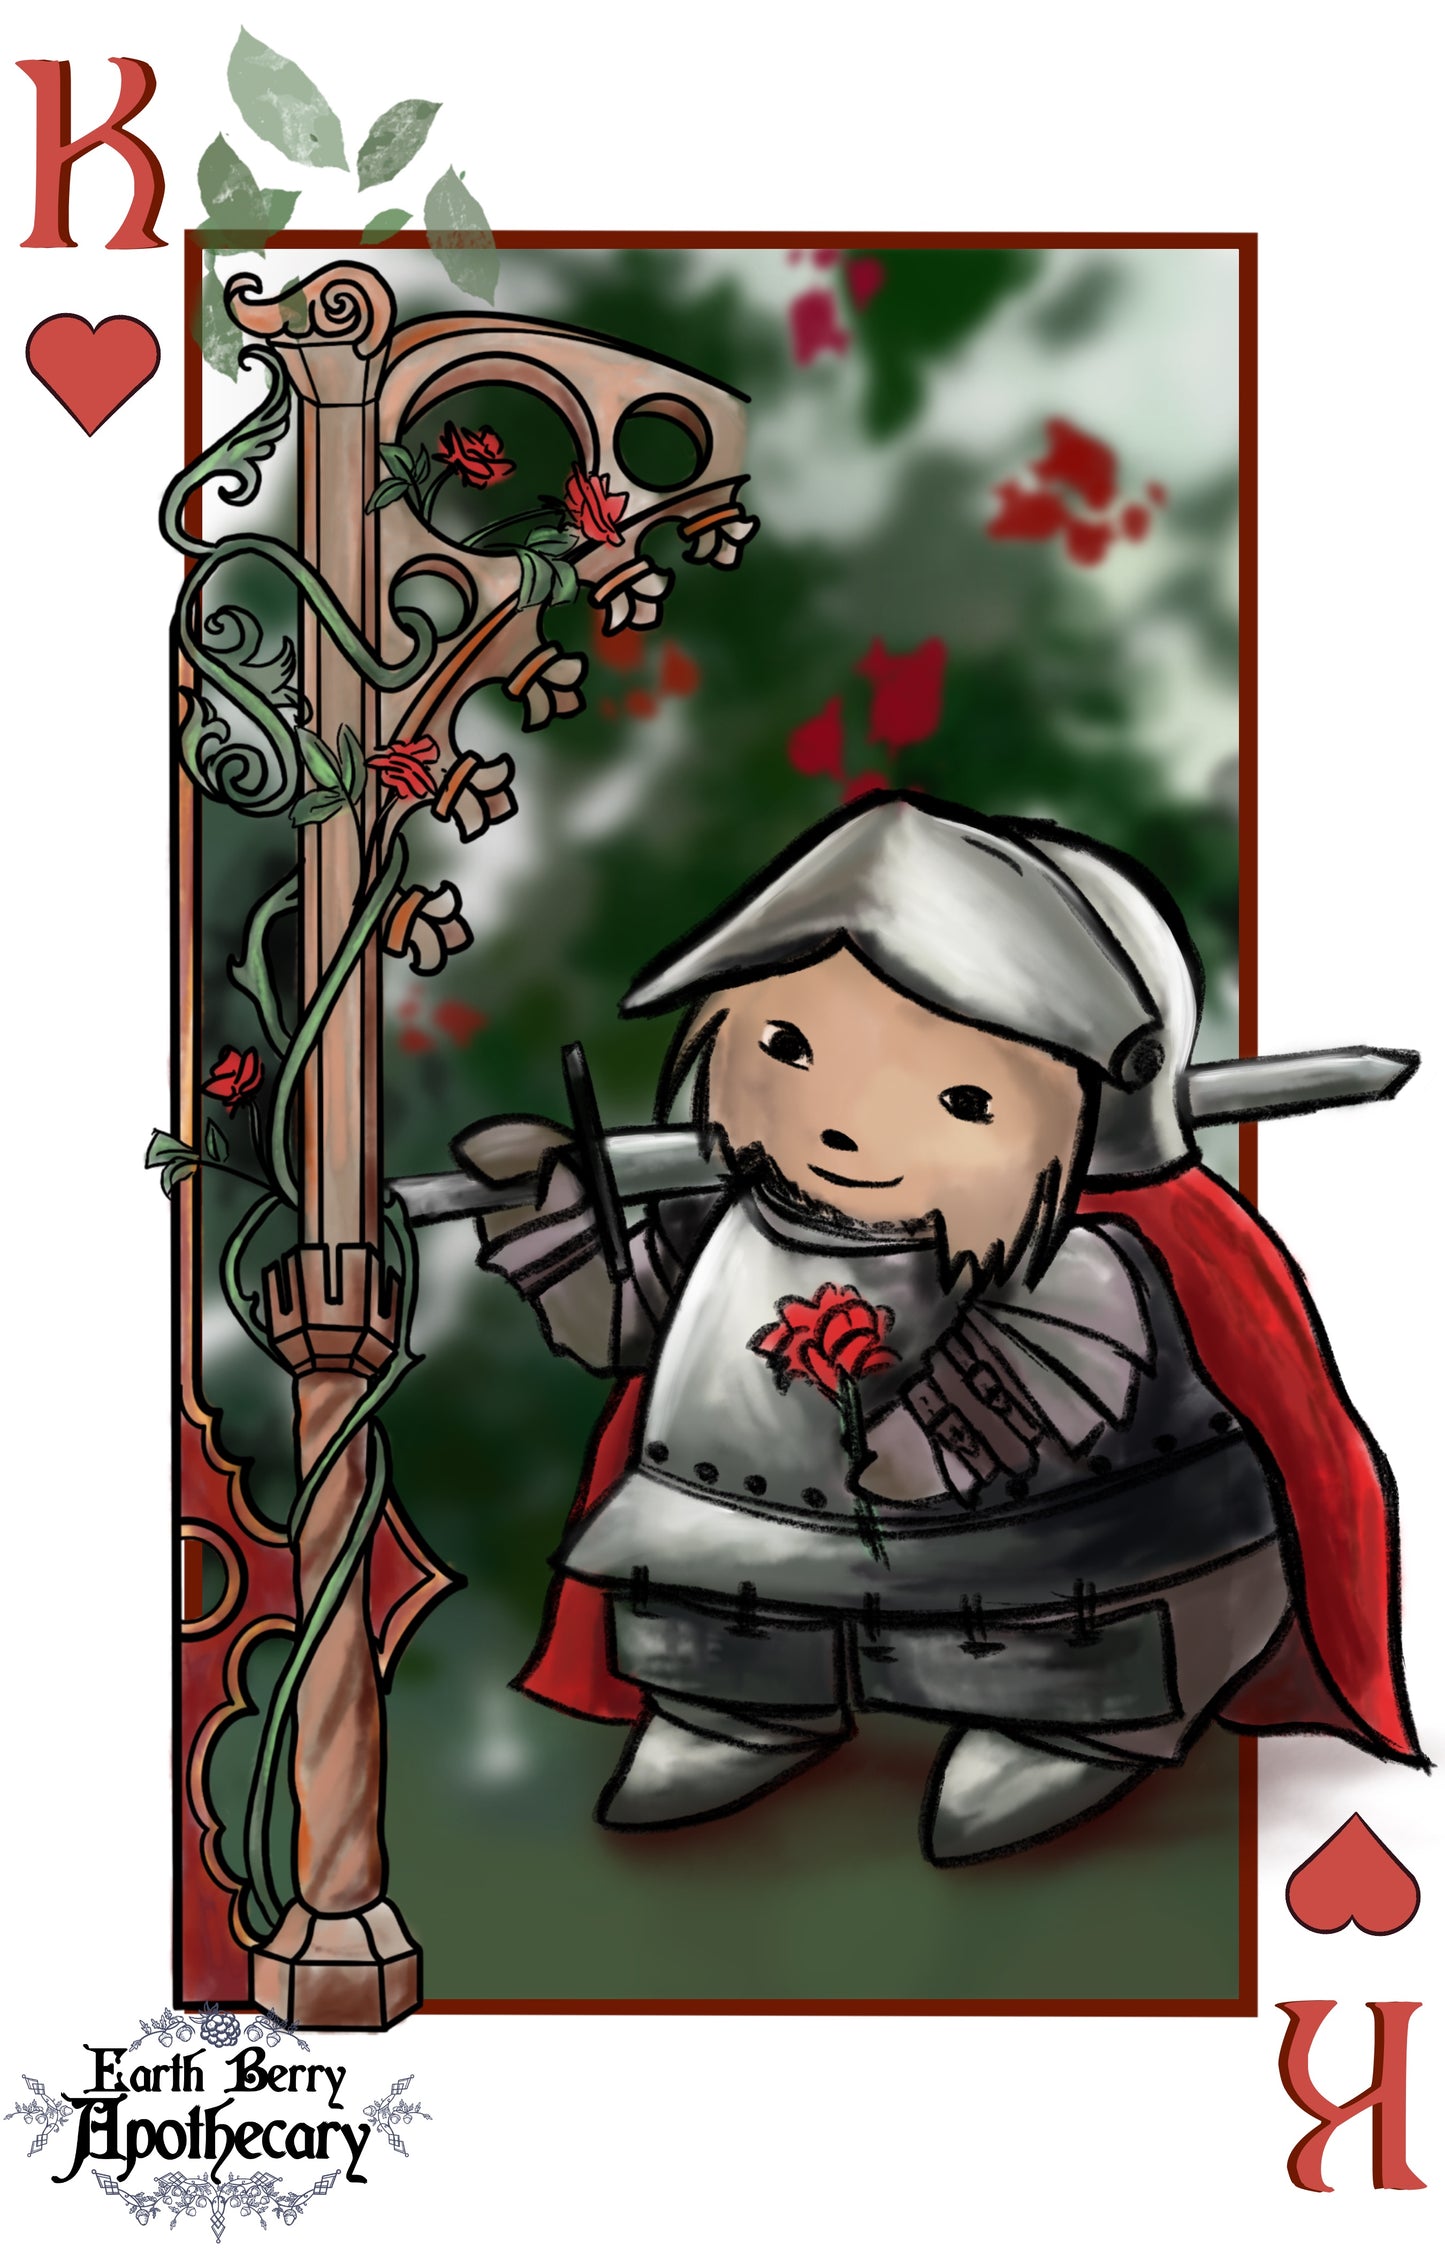 Knight’s charm king of hearts playing card. Fantasy themed playing cards.